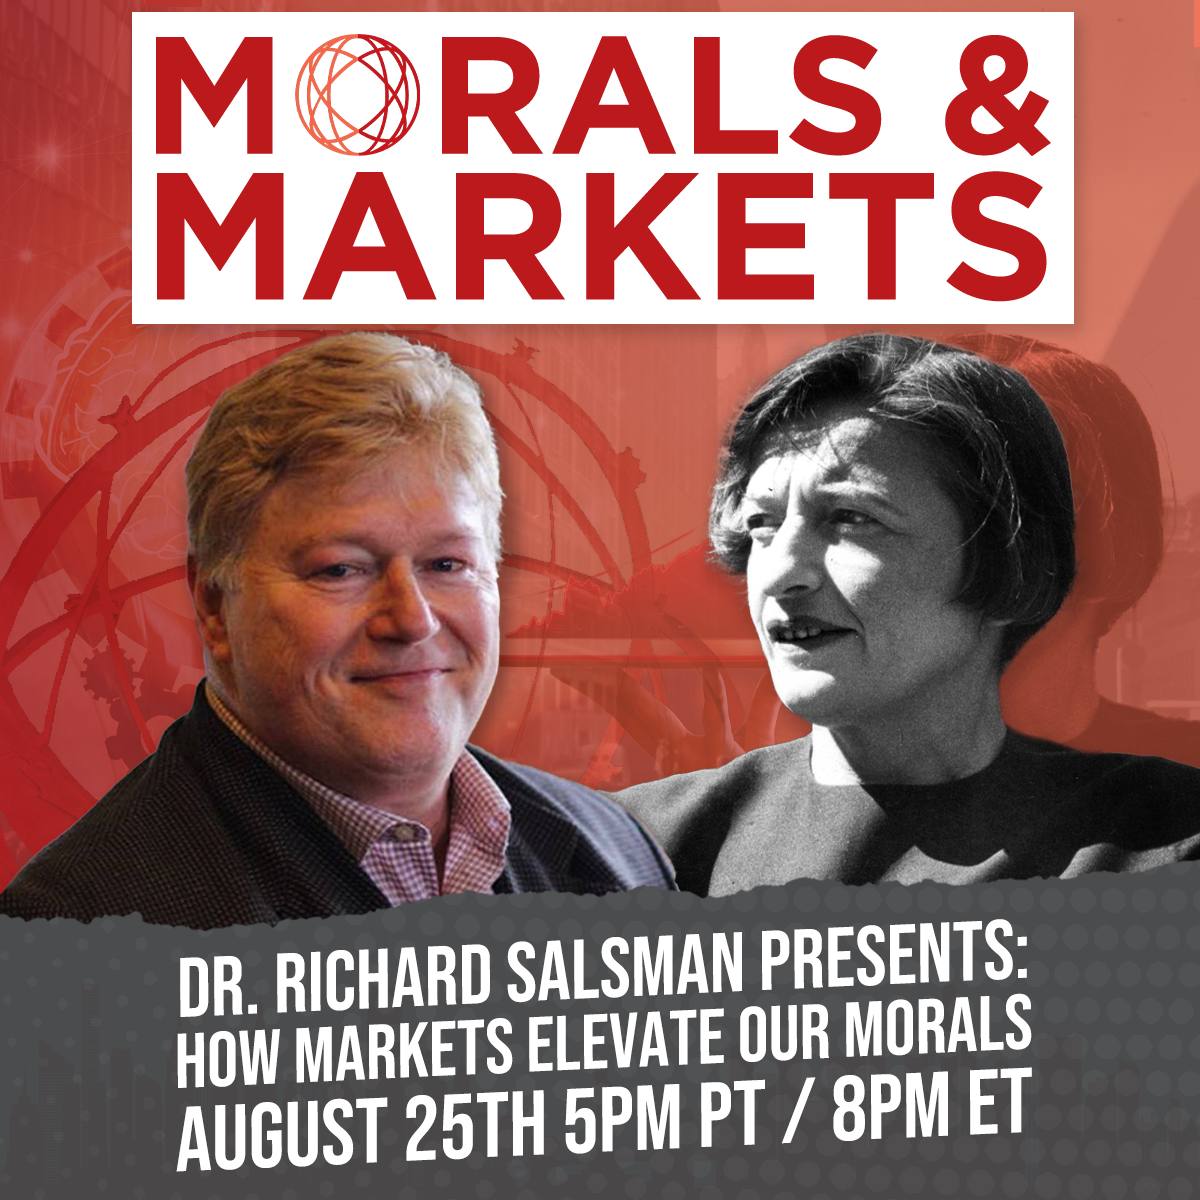 How Markets Elevate Our Morals